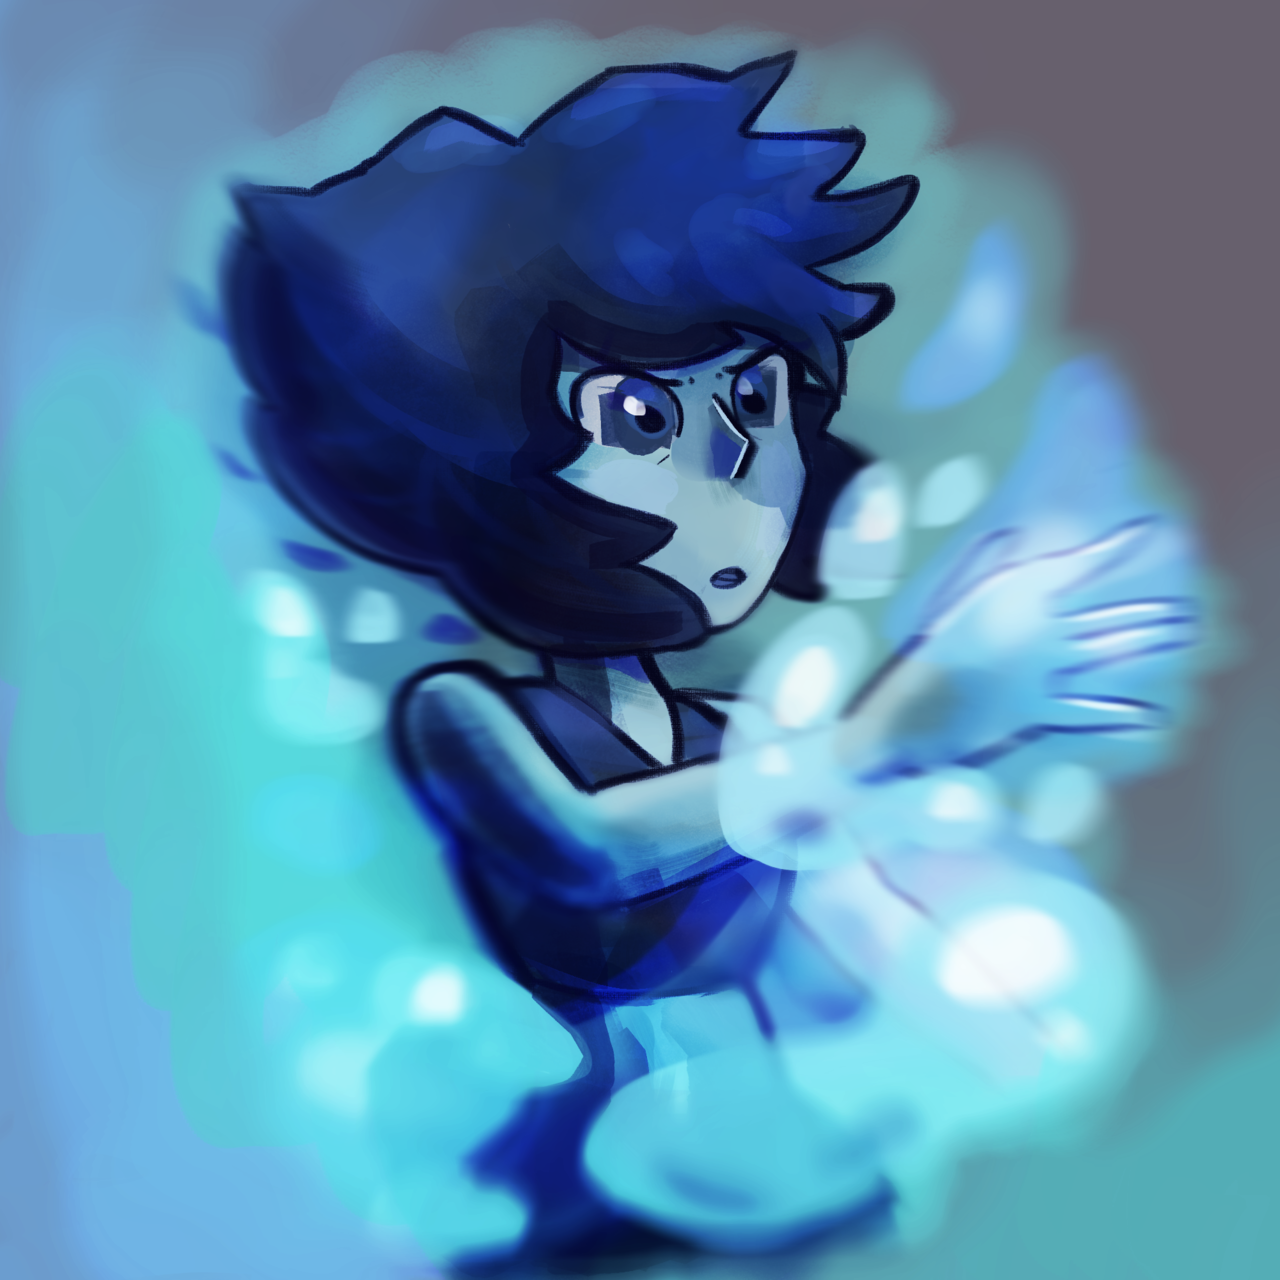 Lapis Lazuli I don’t really like how it turned out.